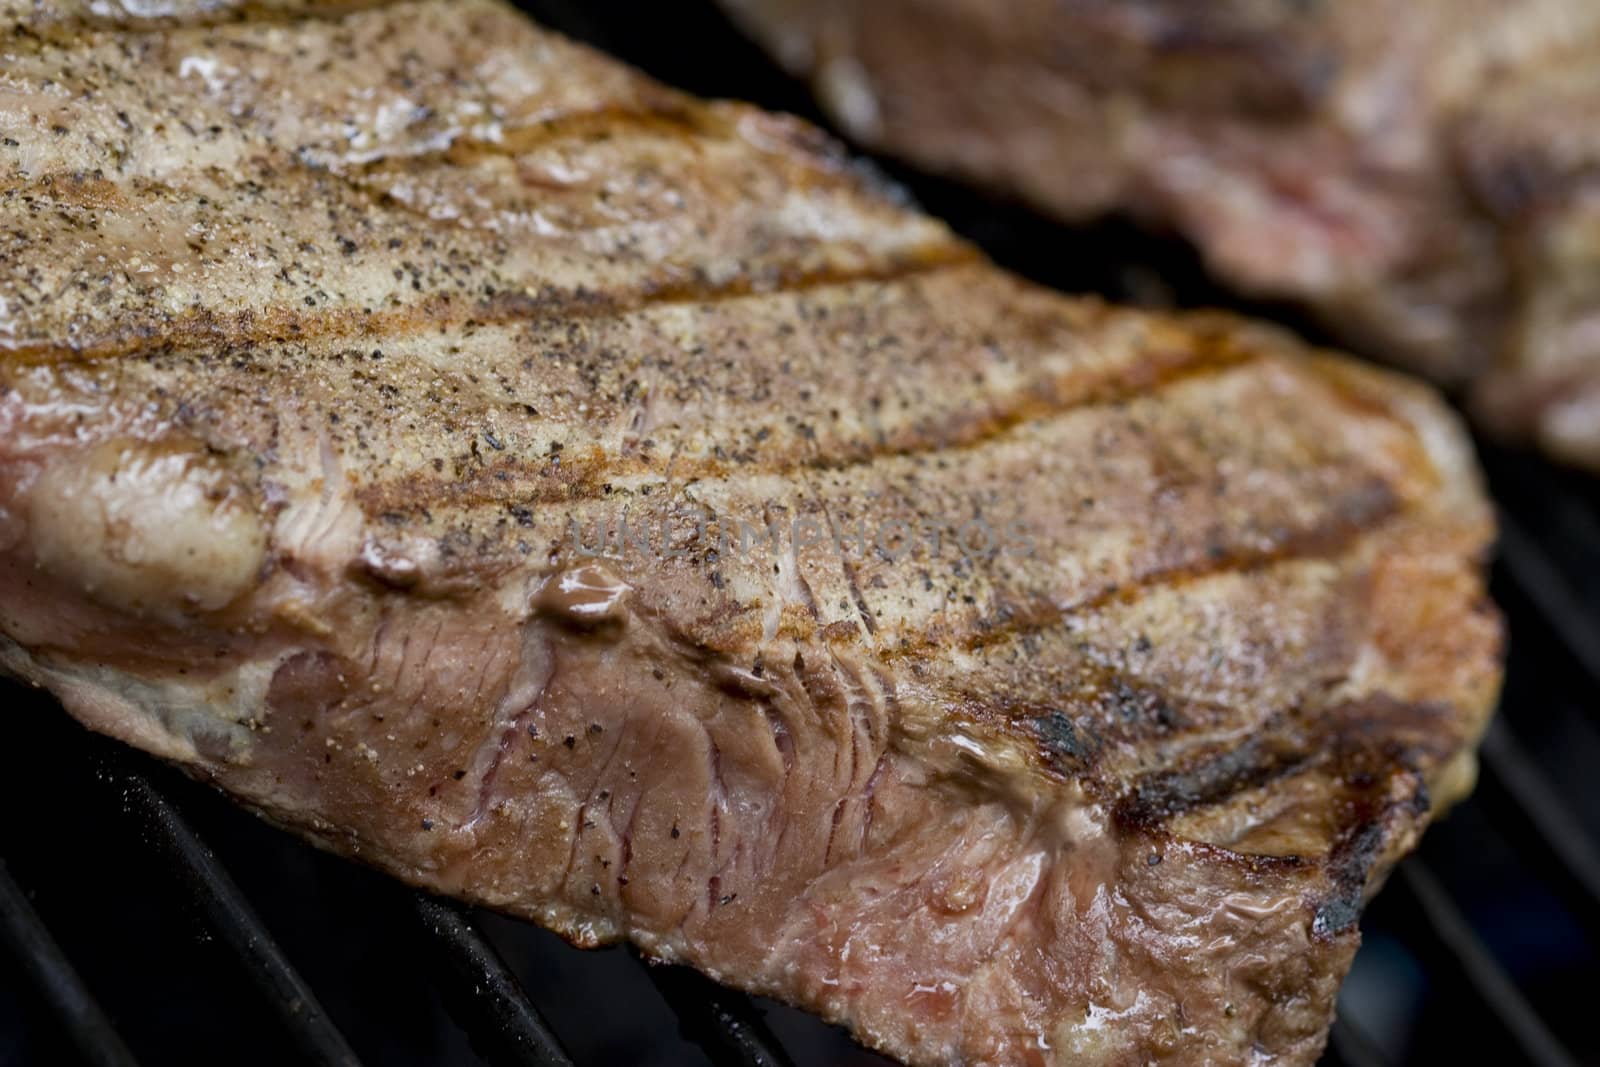 Grilling steaks on the grill nice cuts of meat close up shot shallow DOF